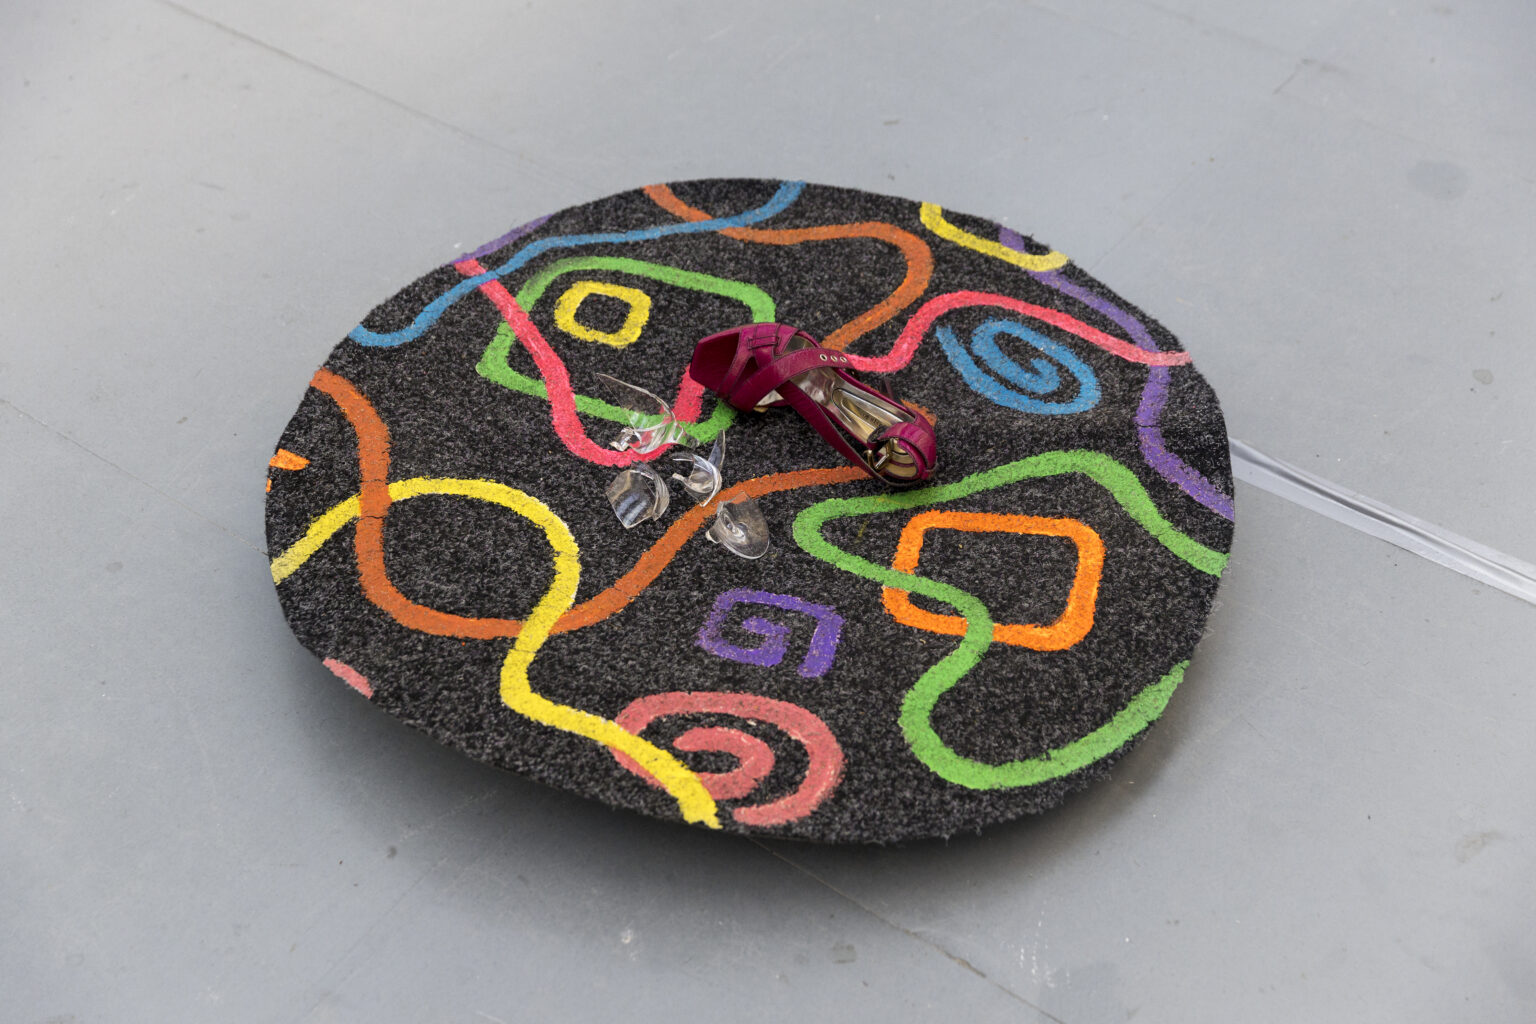 A disc about a meter in diameter, cut from what looks like a dark grey carpet tile is set a few inches from the ground. The disc has brightly coloured squiggles and shapes painted on to it. there is a broken glass and a pink high heeled shoe laying on the top.